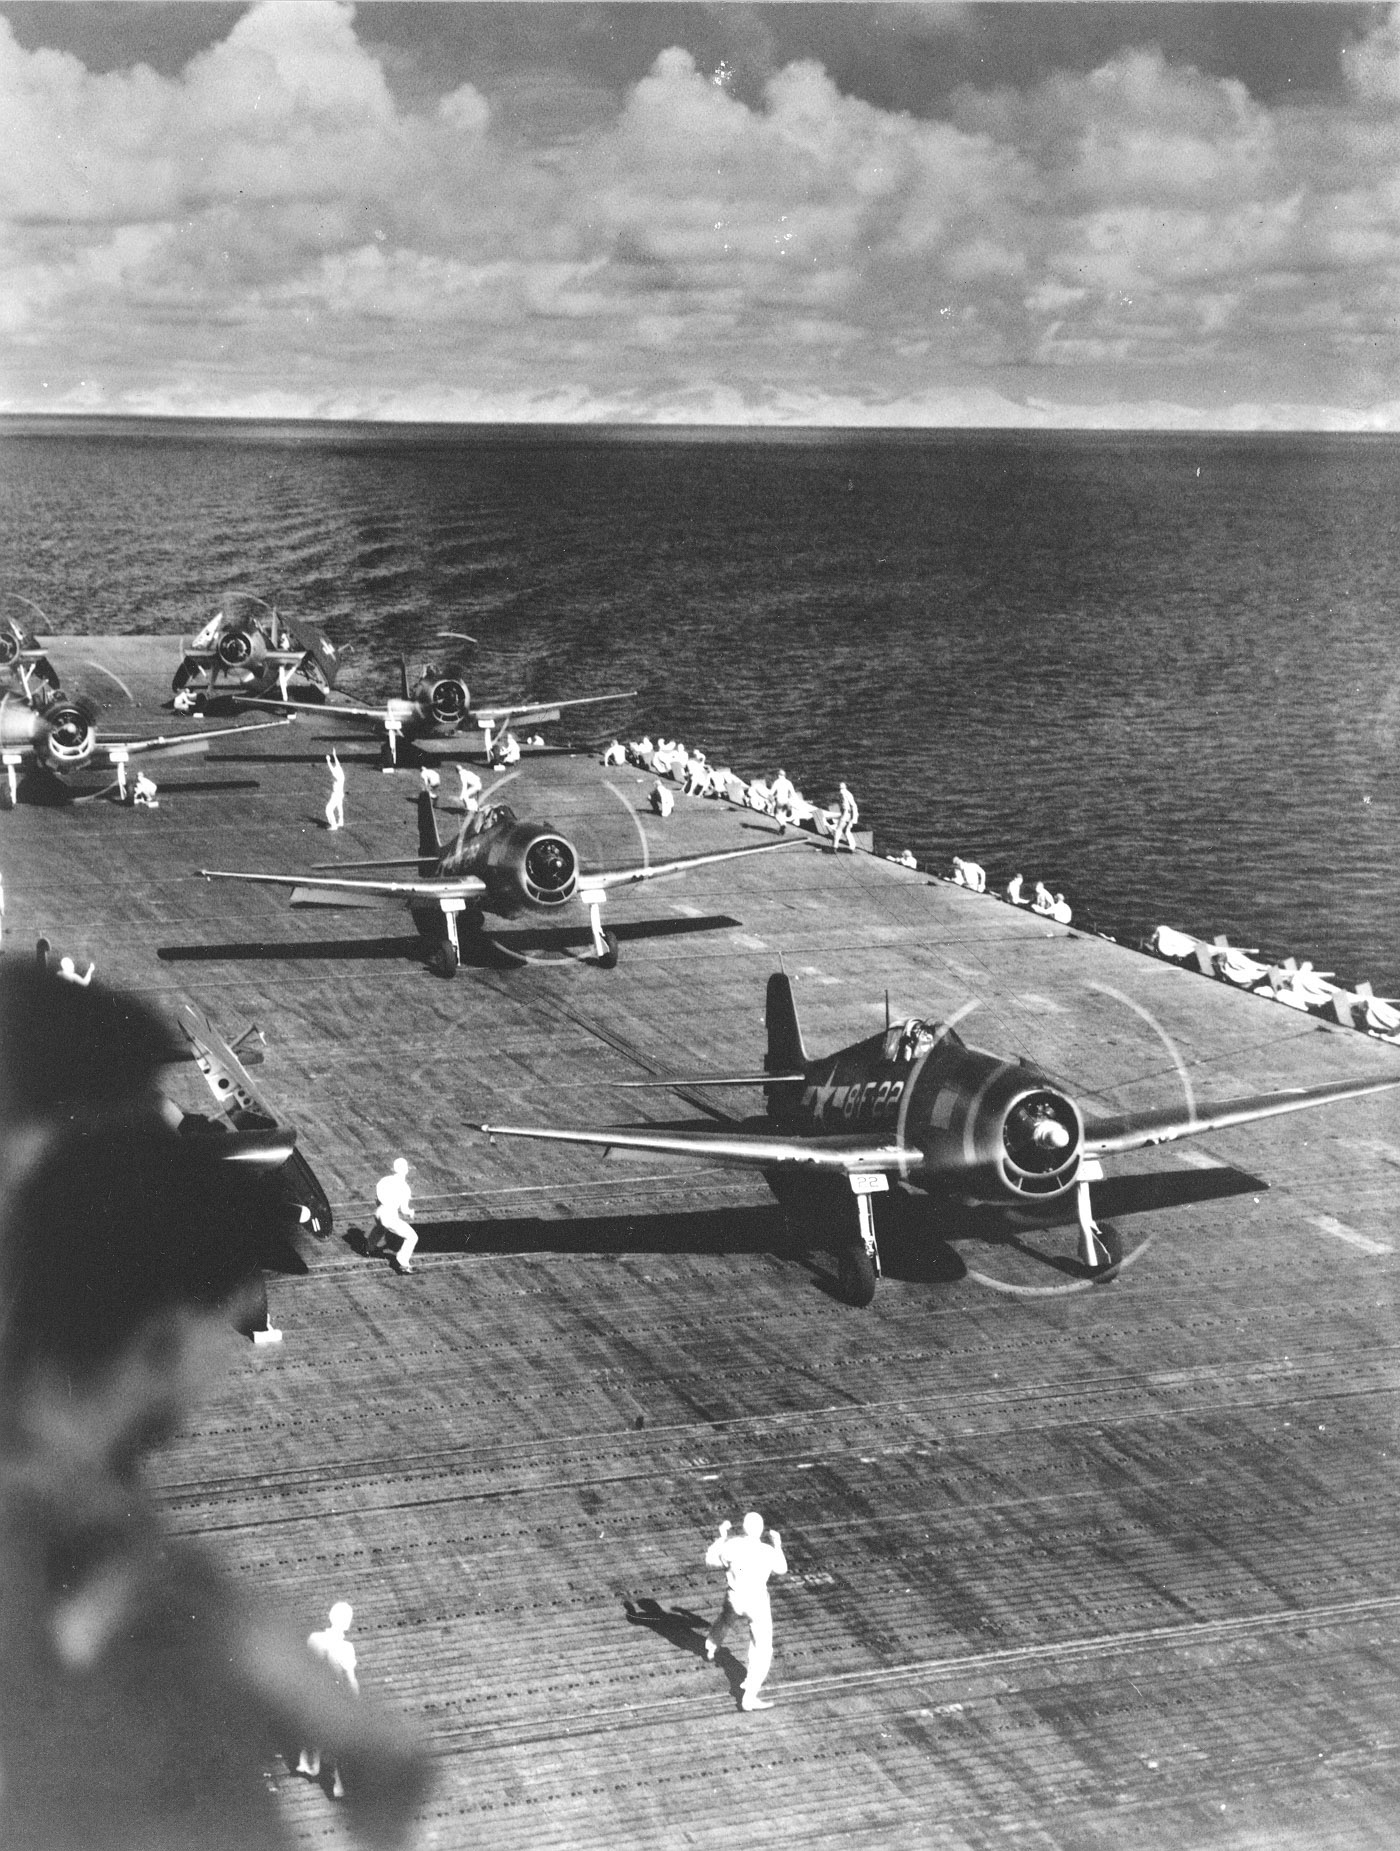 F6F Hellcat aircraft of Fighting Squadron 8 warm up on USS Intrepid's flight deck, 1943, photo 2 of 2; probably during stateside shakedown training